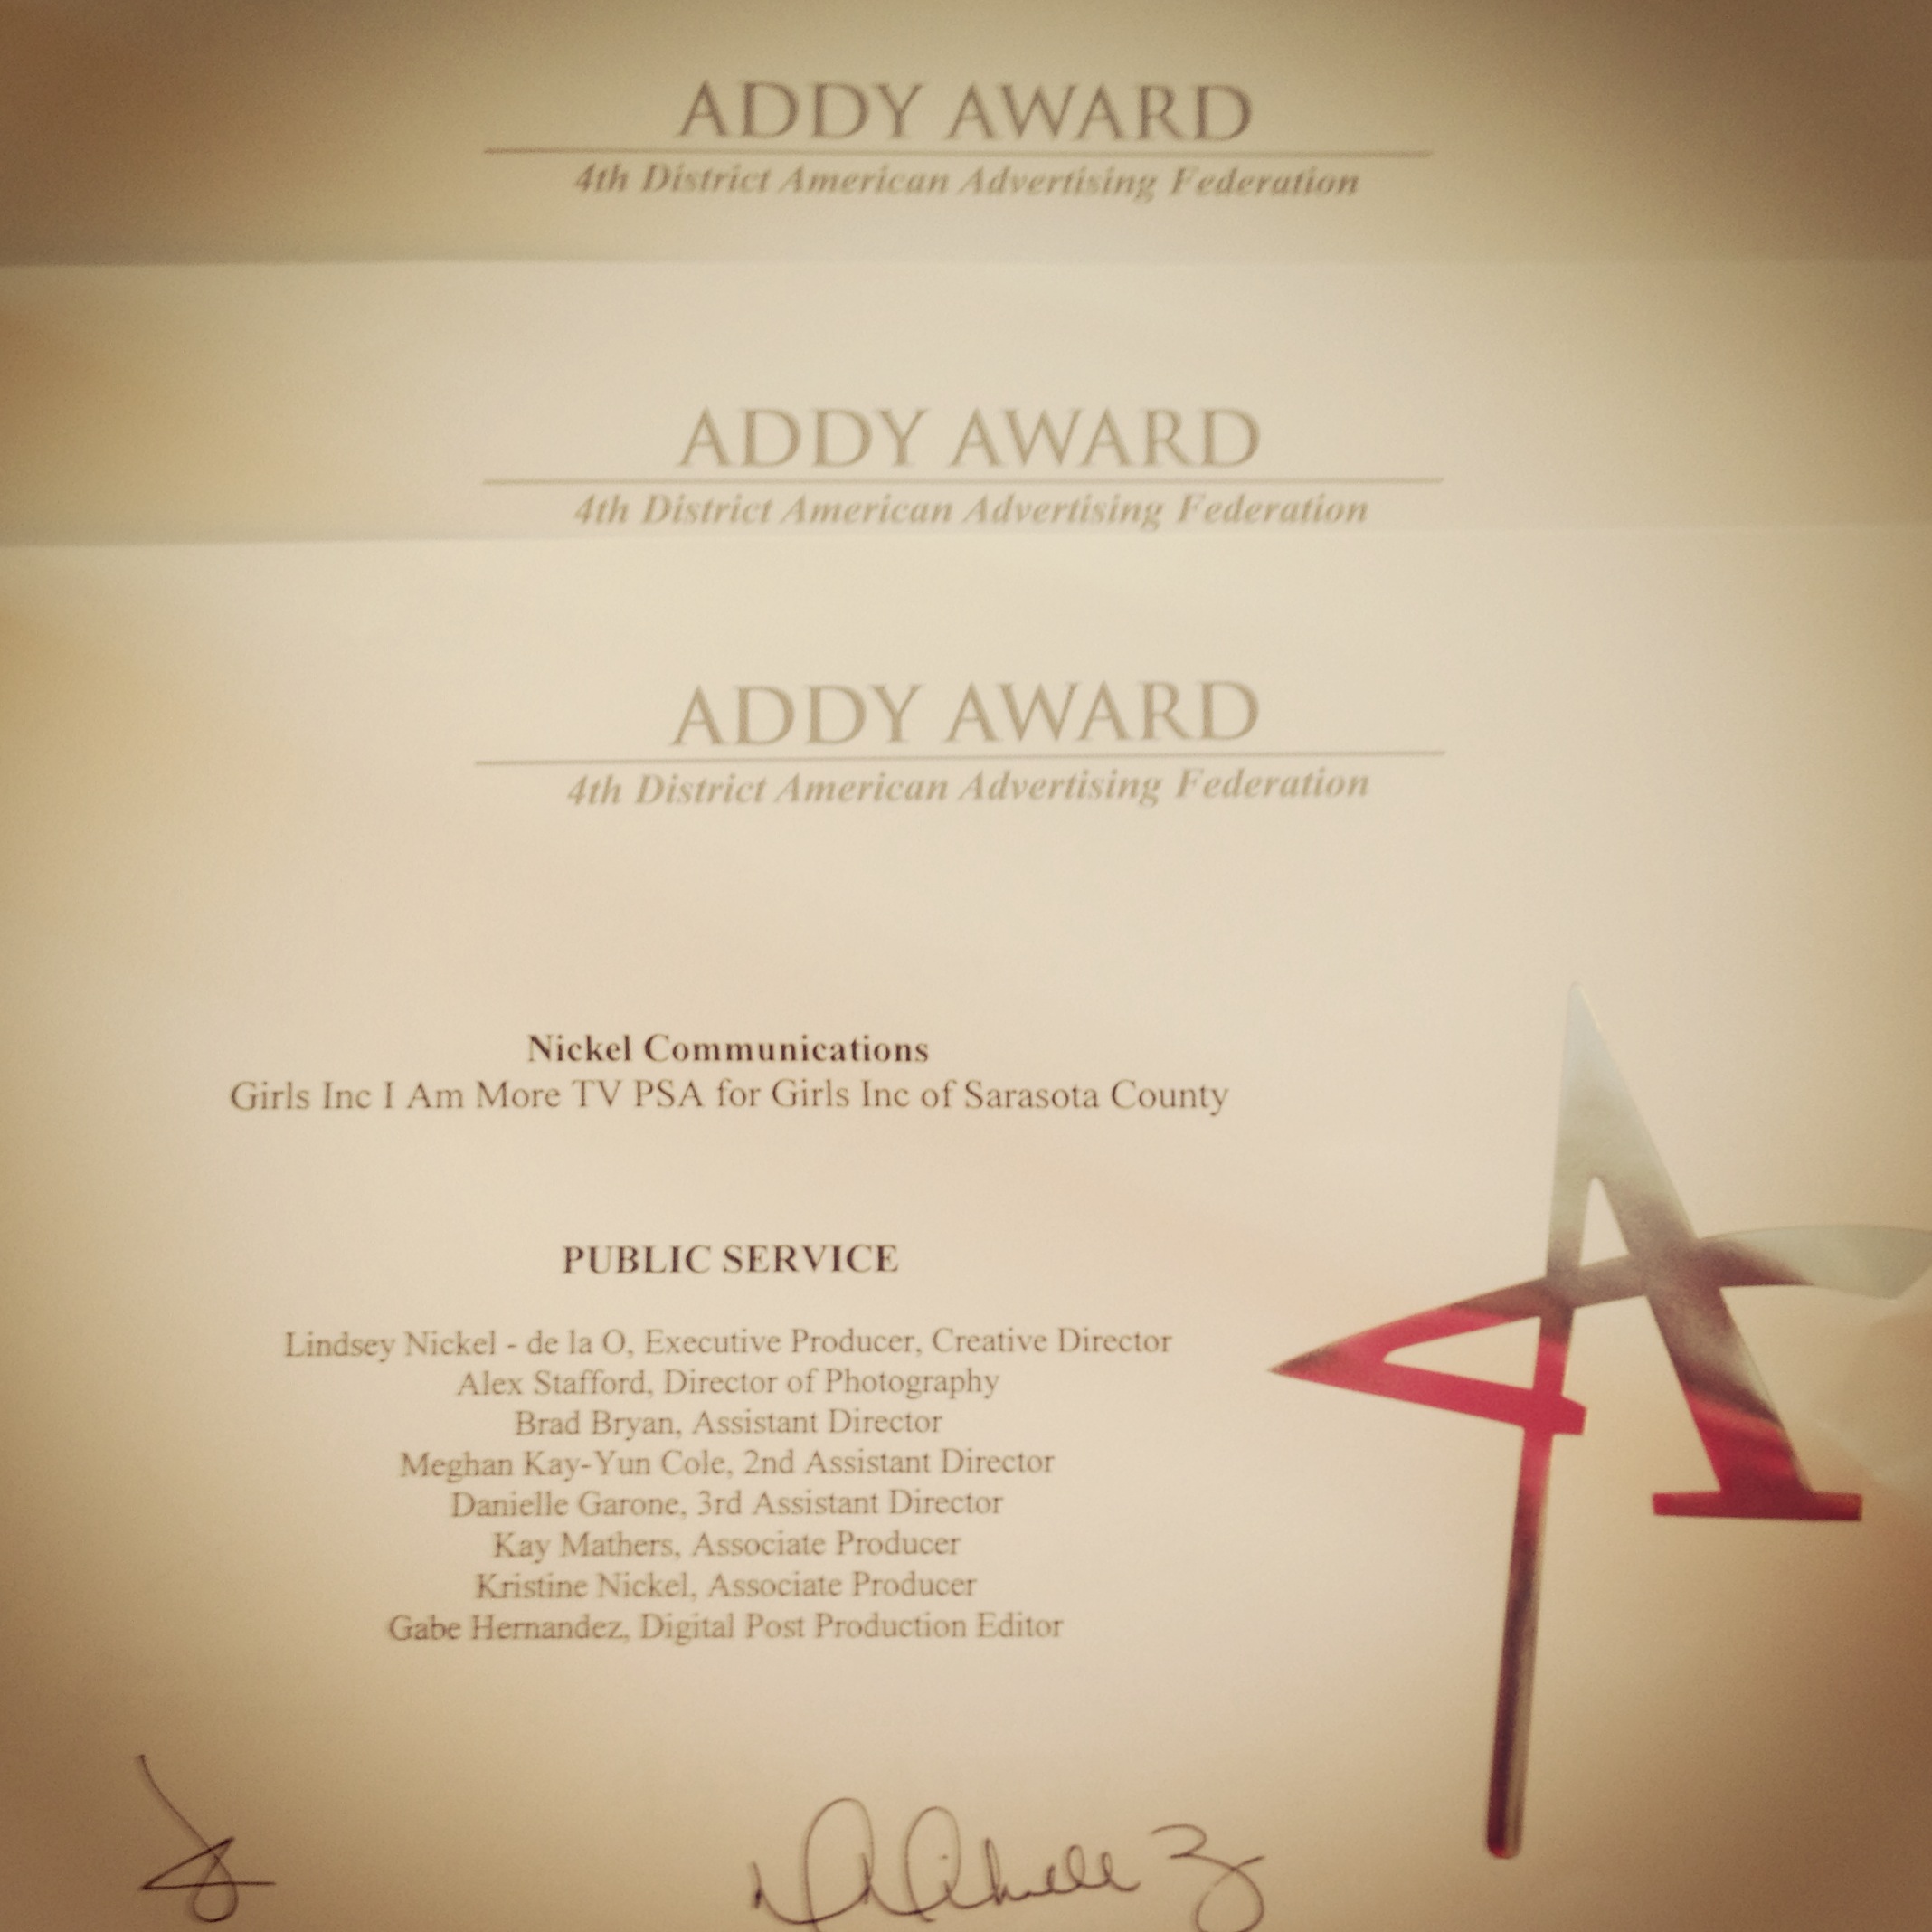 3 District ADDY Awards for Nickel Communications in Sarasota